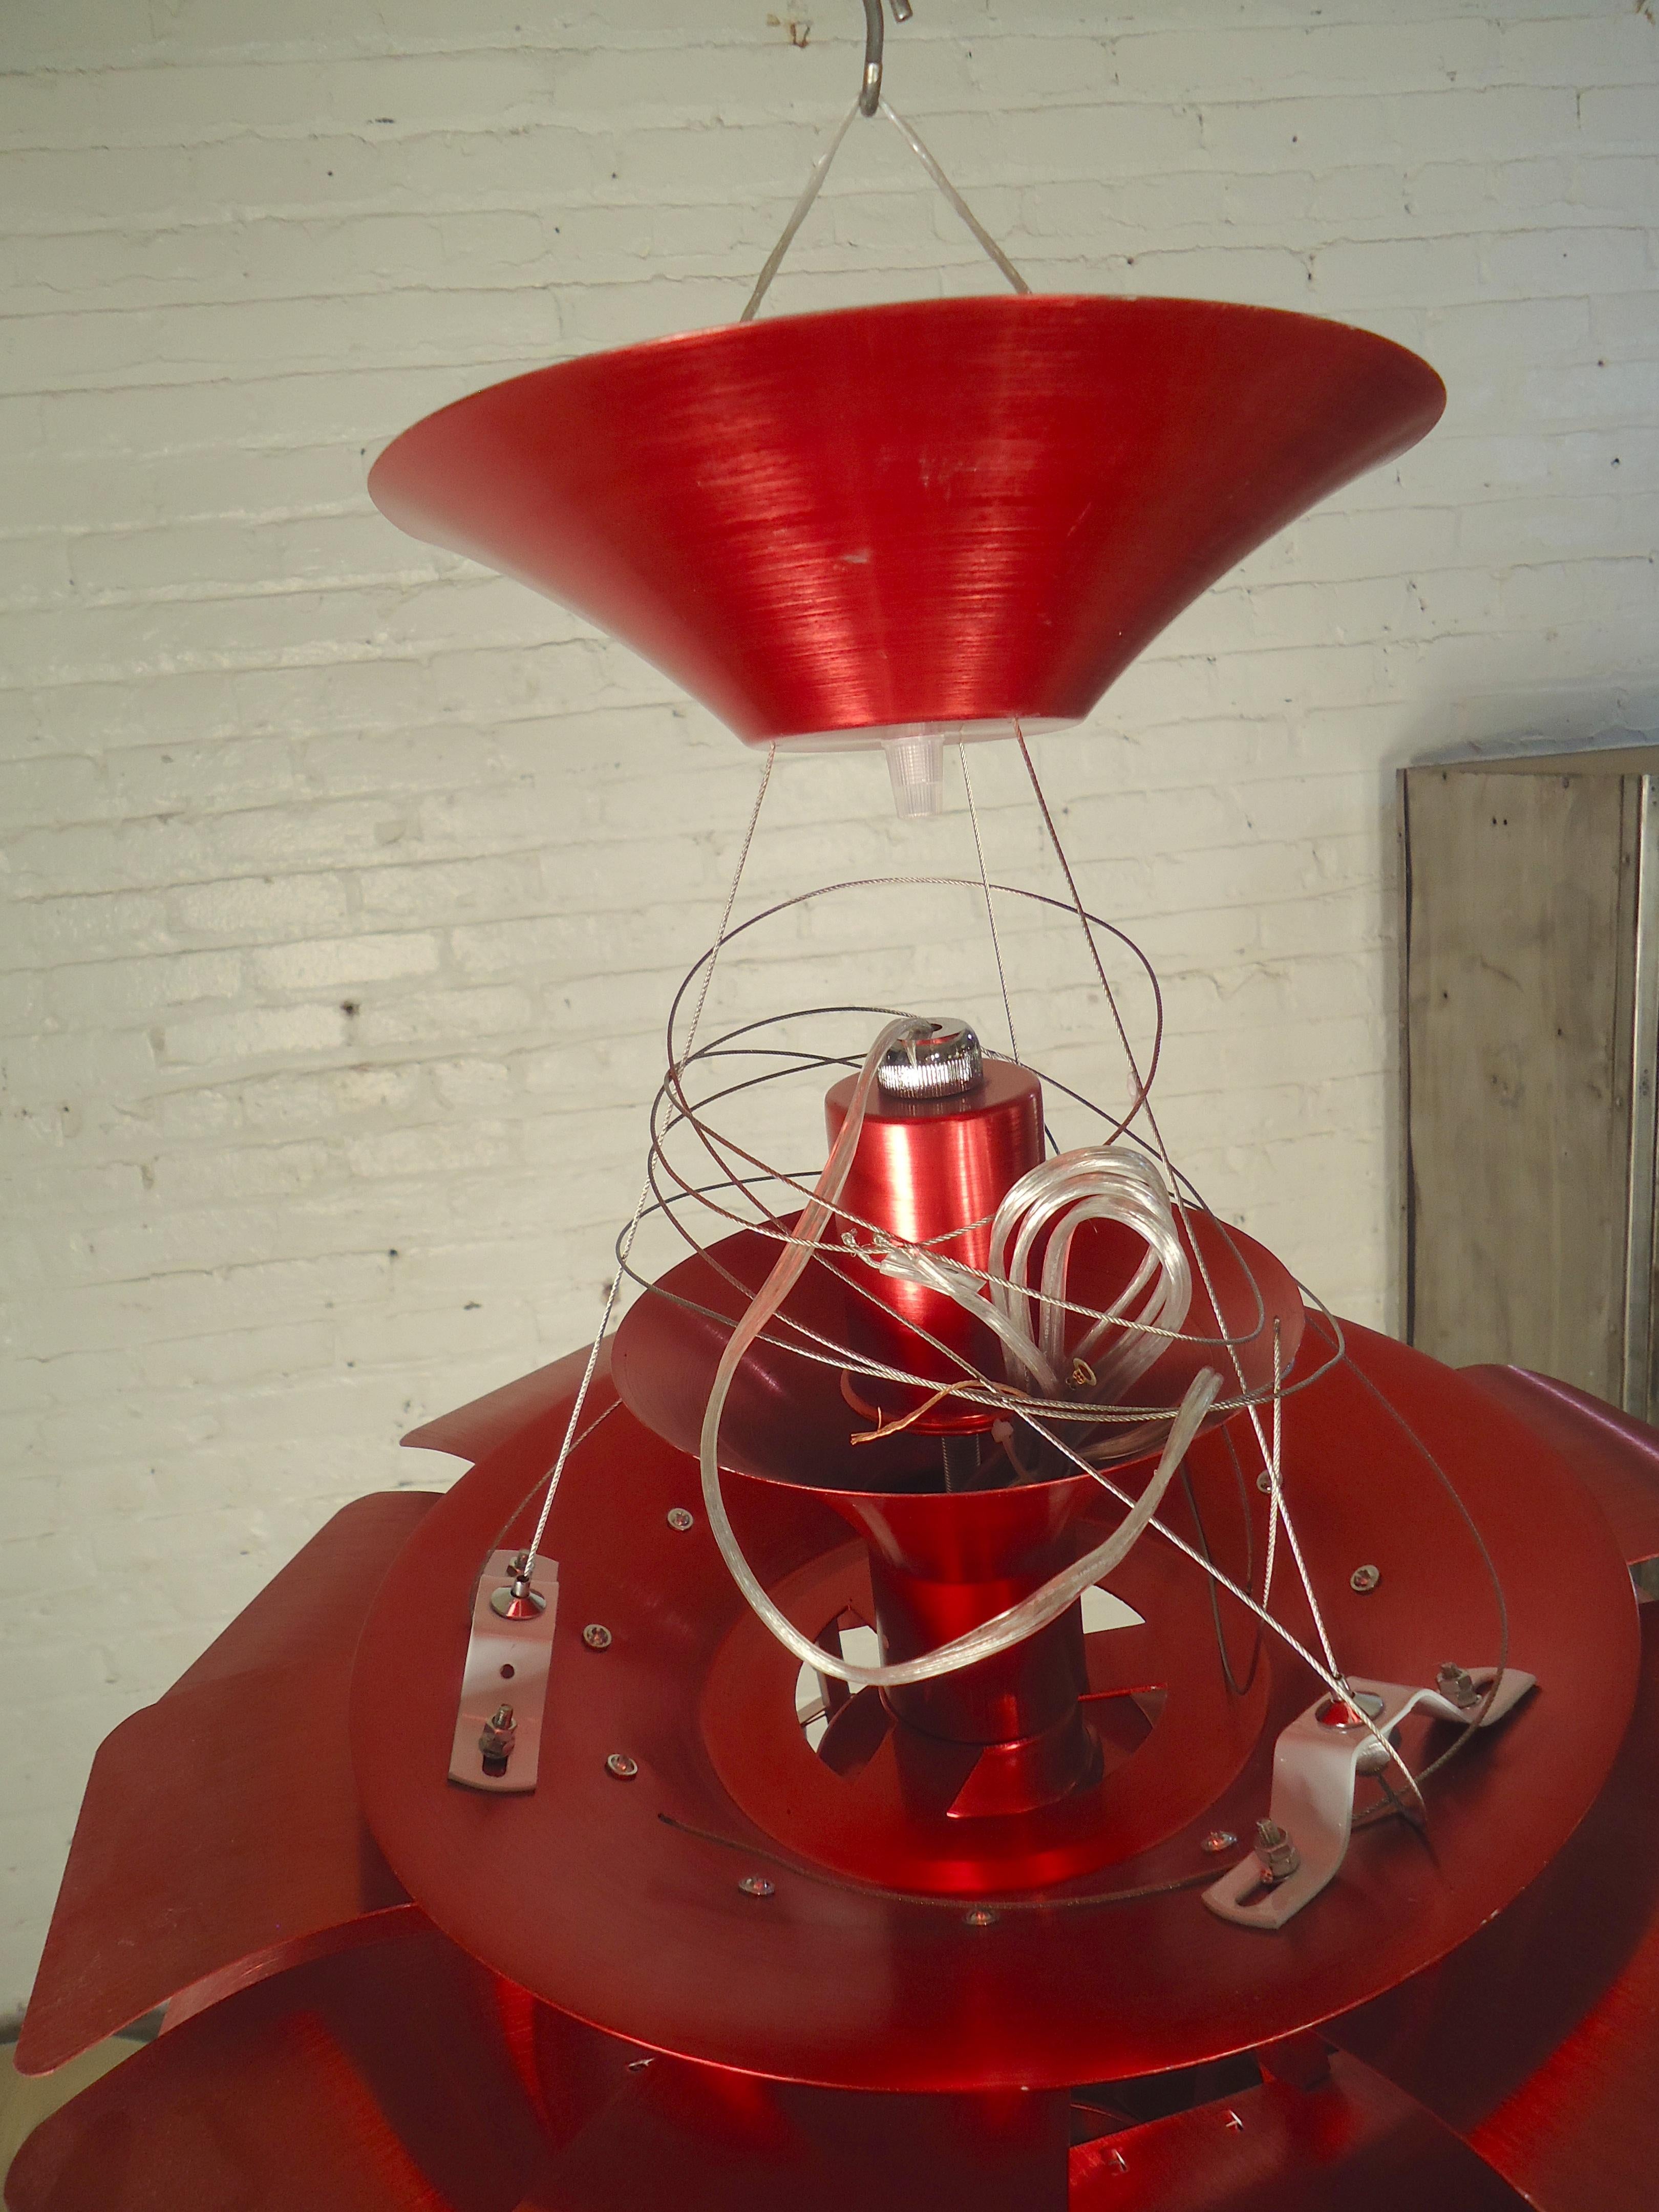 Midcentury style chandelier by Poul Henningsen with aluminum leaves. Great pop of red color!

(Please confirm item location - NY or NJ - with dealer).
 